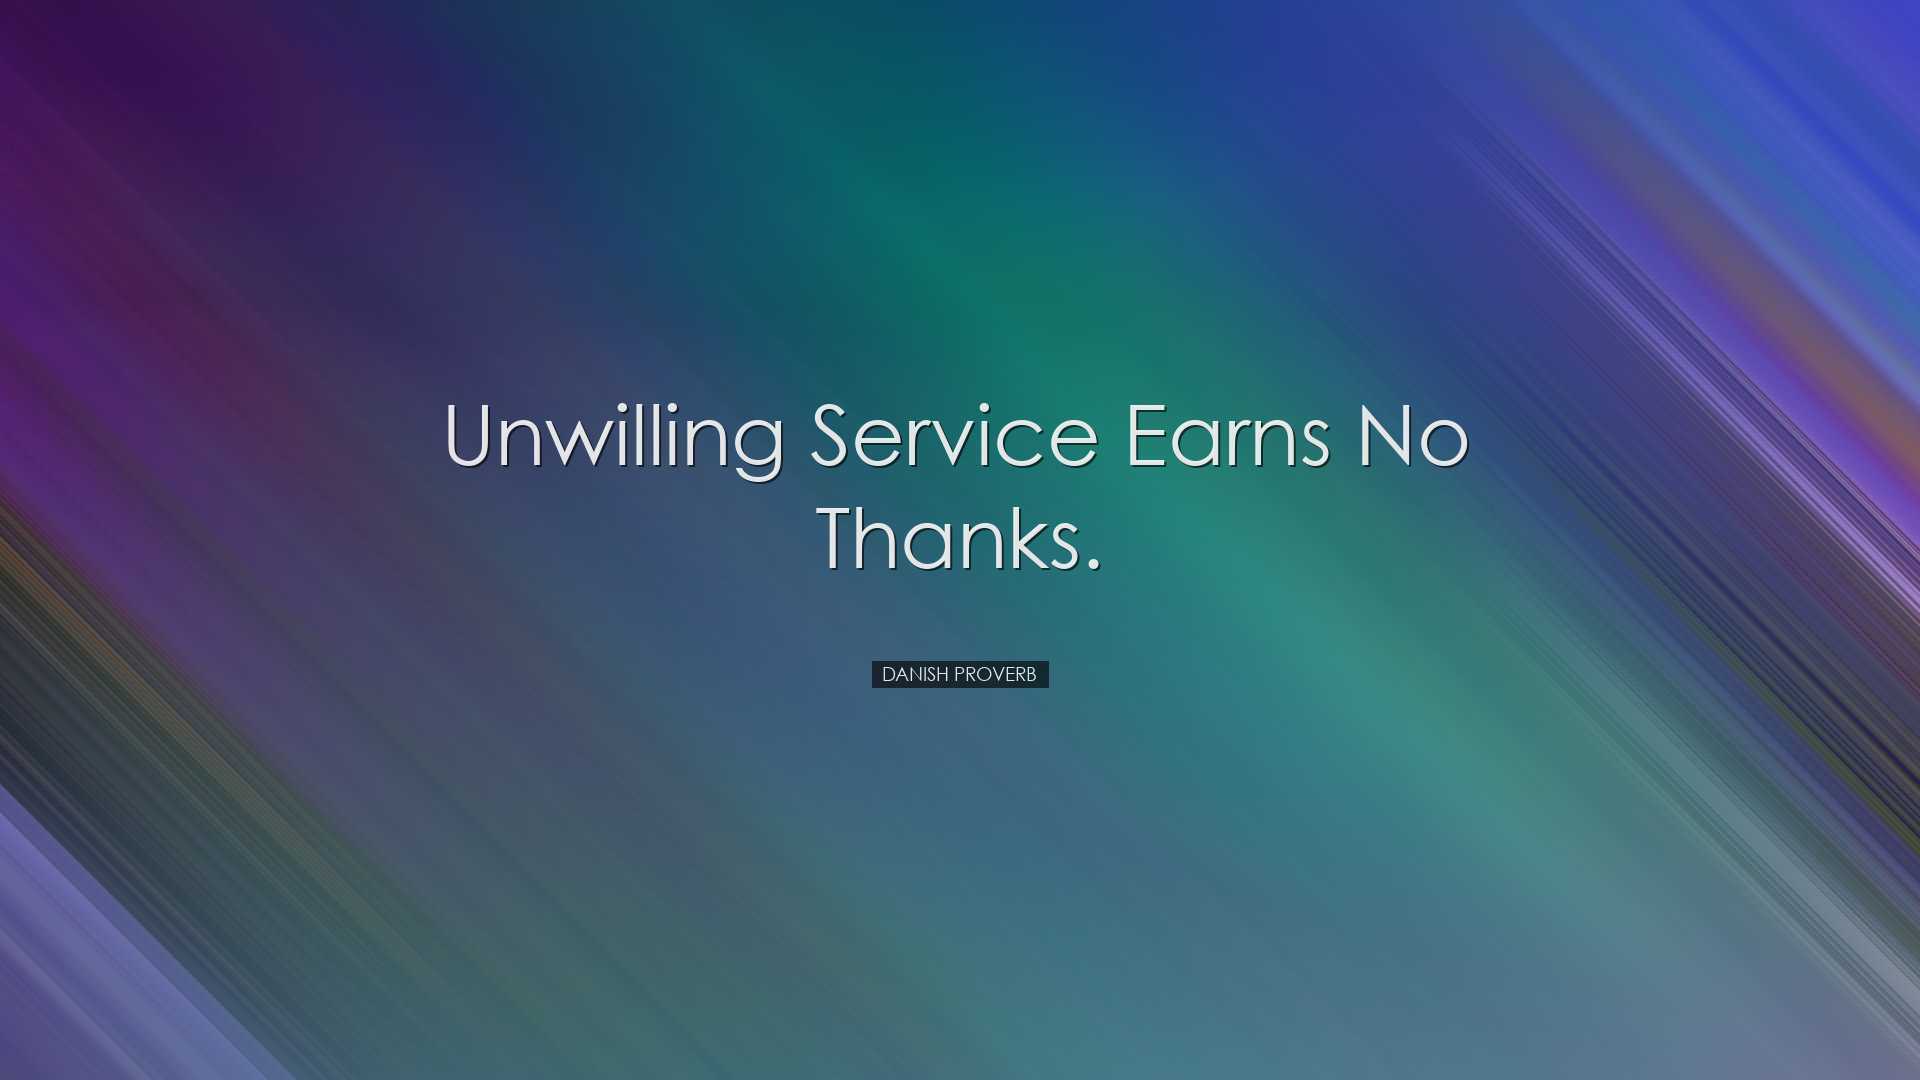 Unwilling service earns no thanks. - Danish proverb